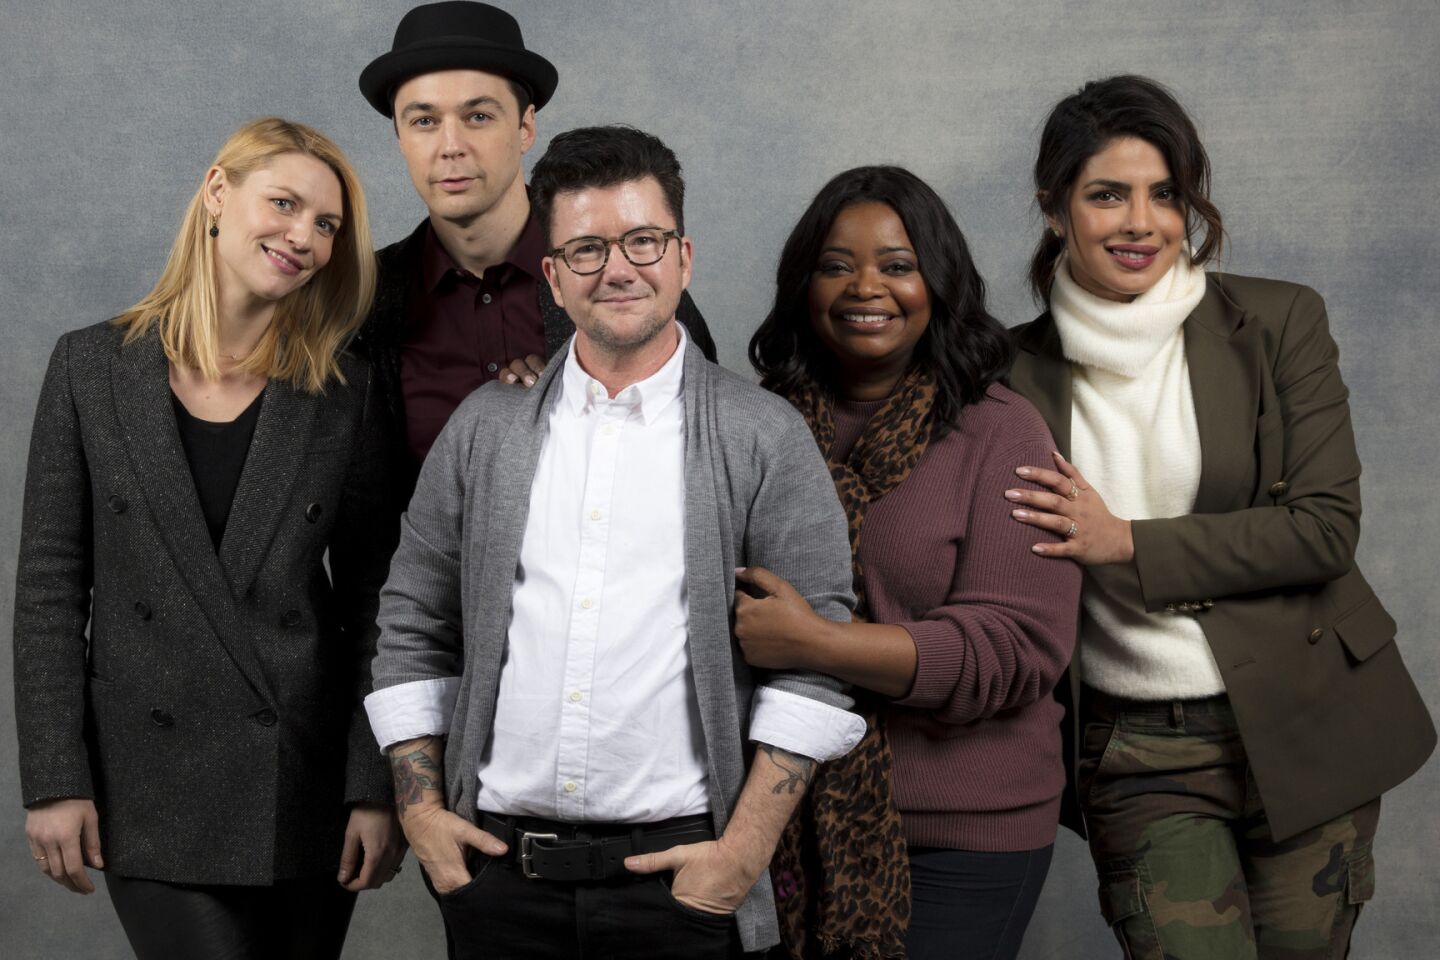 Actress Claire Danes, actor Jim Parsons, director Silas Howard, actress Octavia Spencer, and actress Priyanka Chopra from the film, "A Kid Like Jake," photographed in the L.A. Times Studio at Chase Sapphire on Main, during the Sundance Film Festival in Park City, Utah, Jan. 21, 2018.